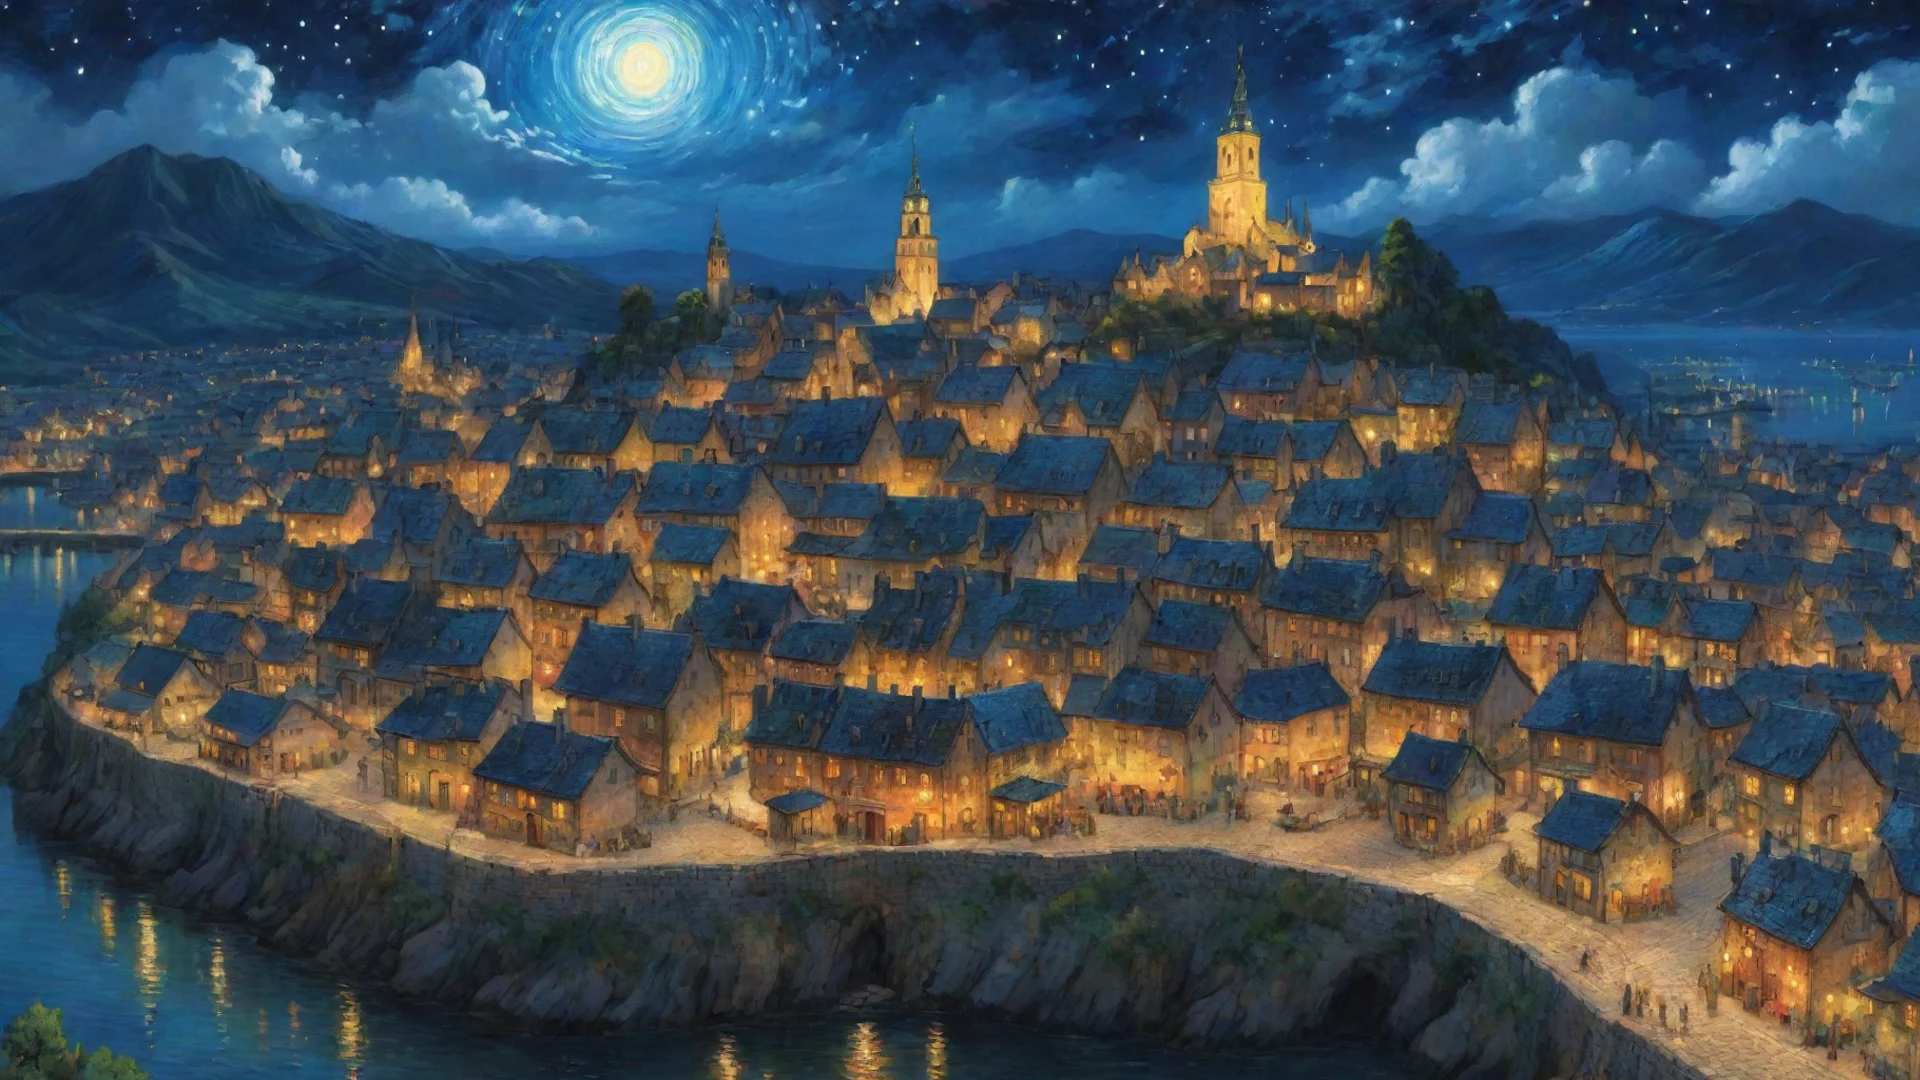 heavenly epic town lit up at night sky epic lovely artistic ghibli van gogh happyness bliss peace  detailed asthetic hd wow wide